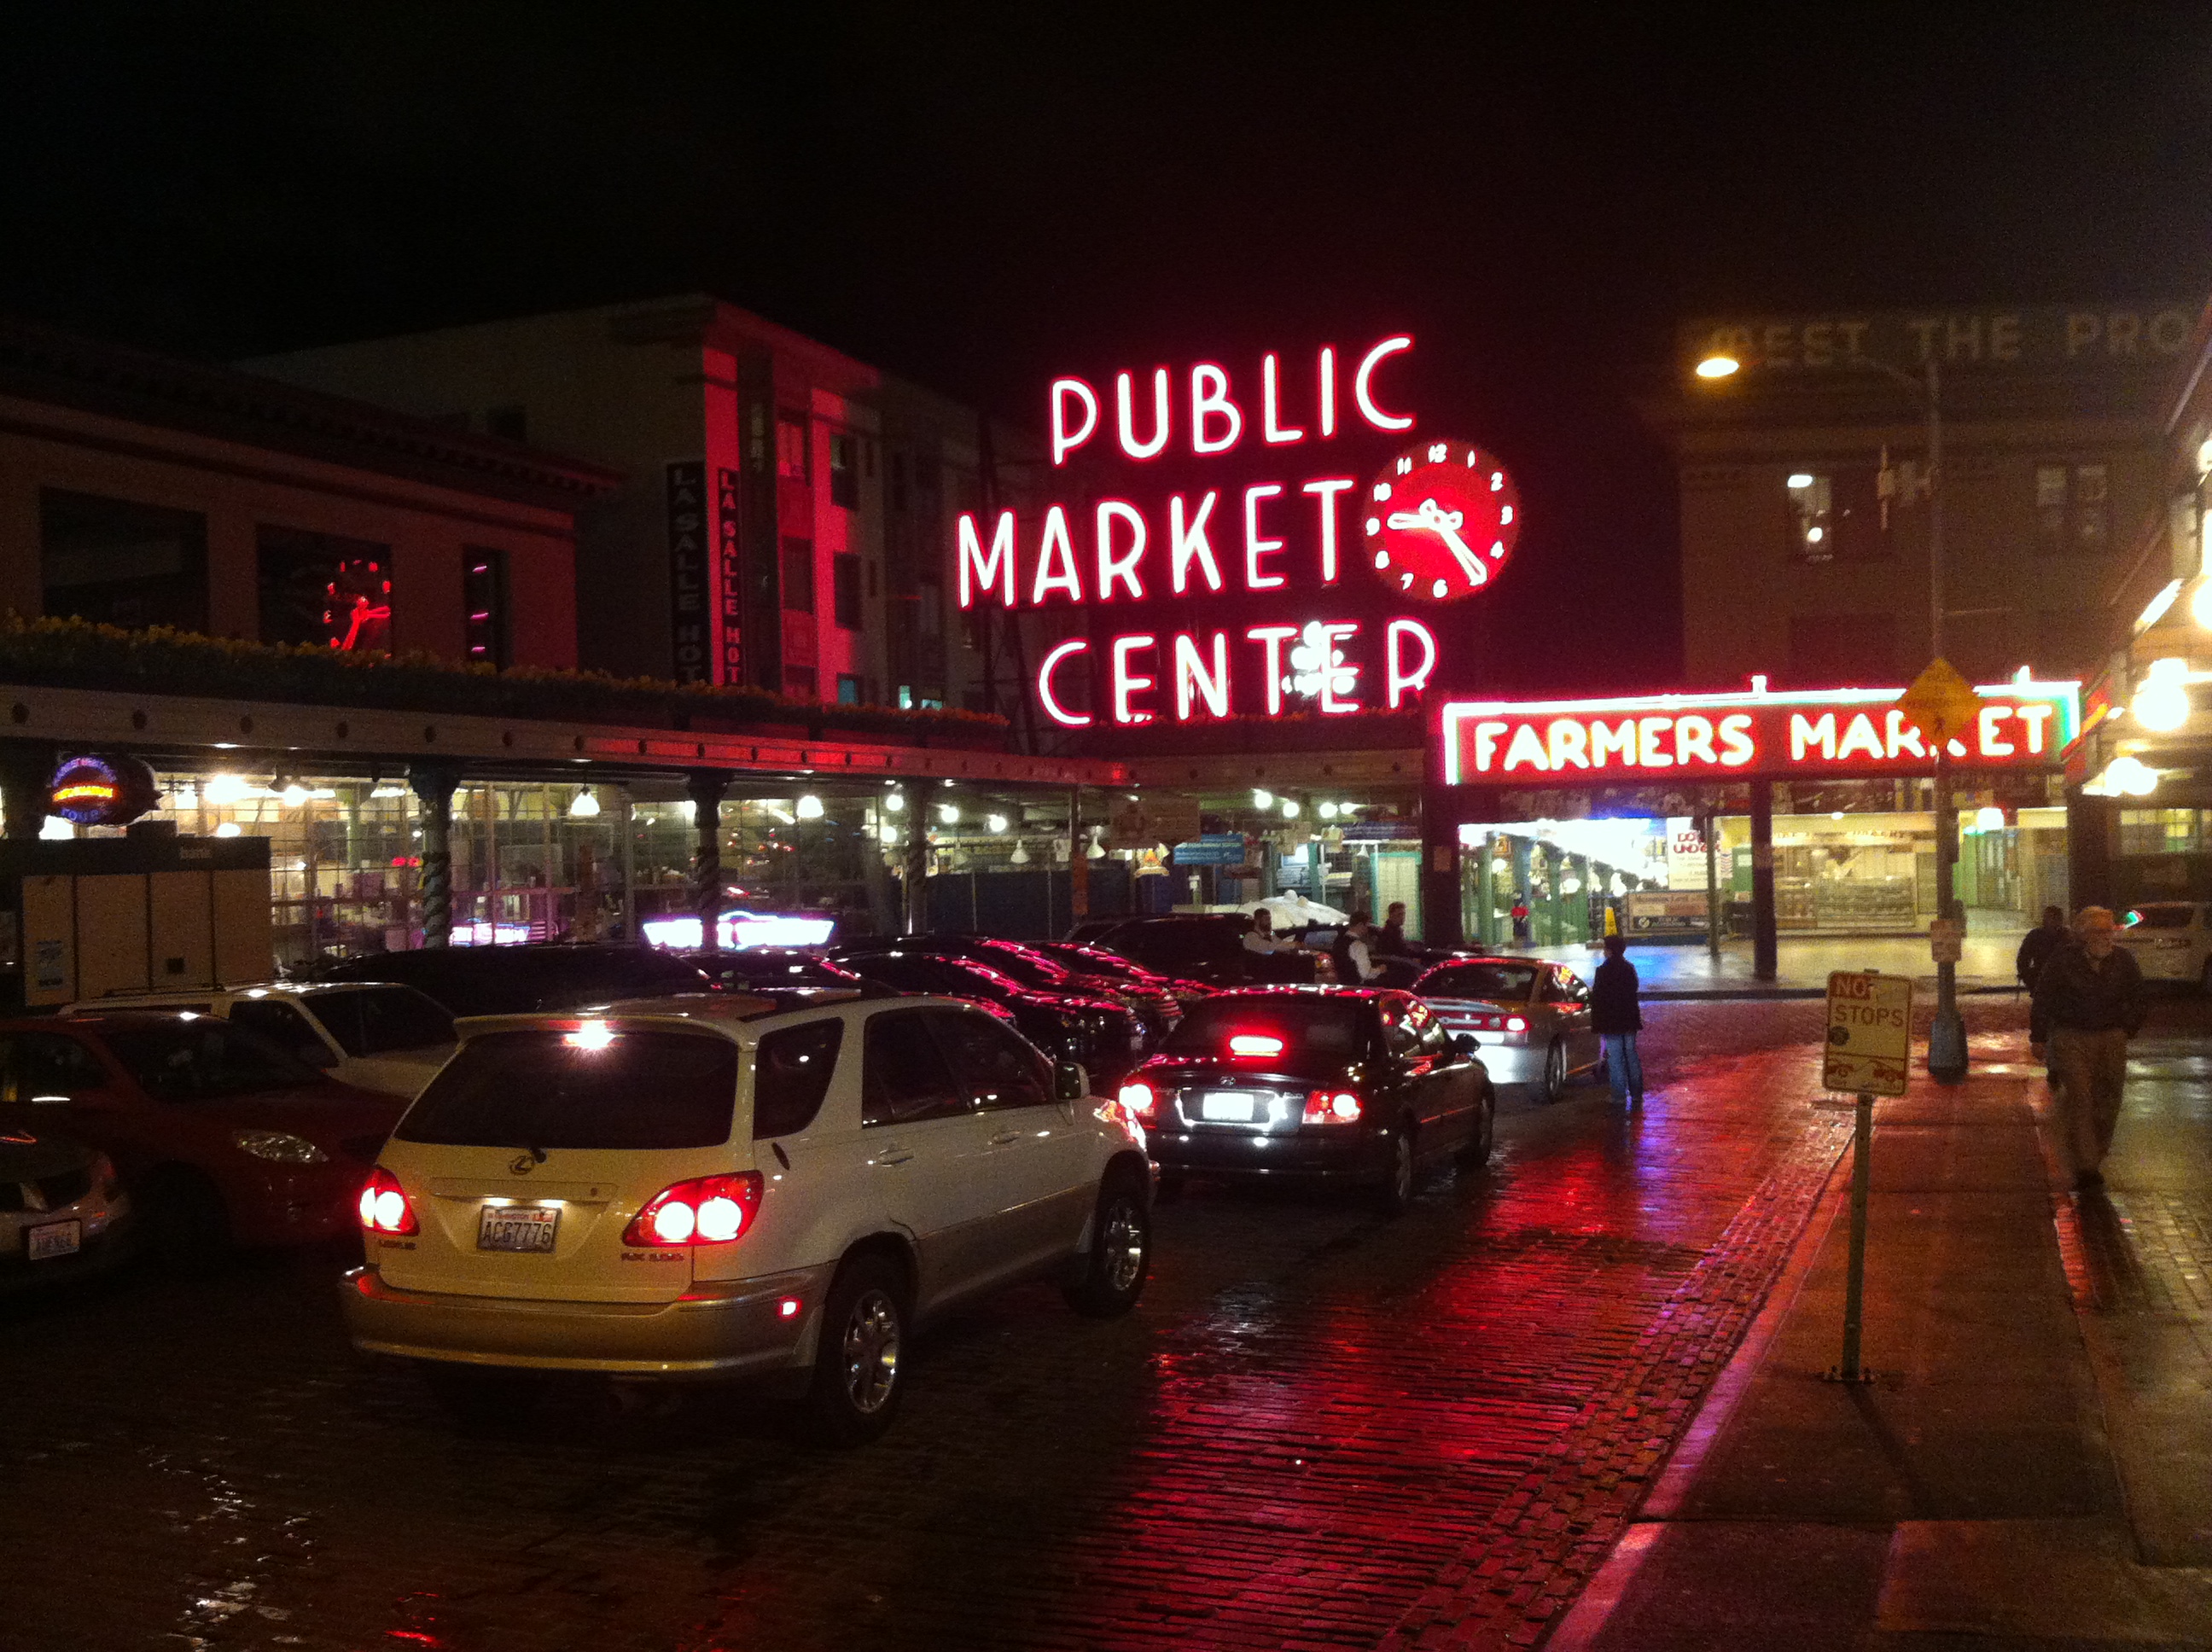 Pike Place Market at night, Seattle - March 15, 2013